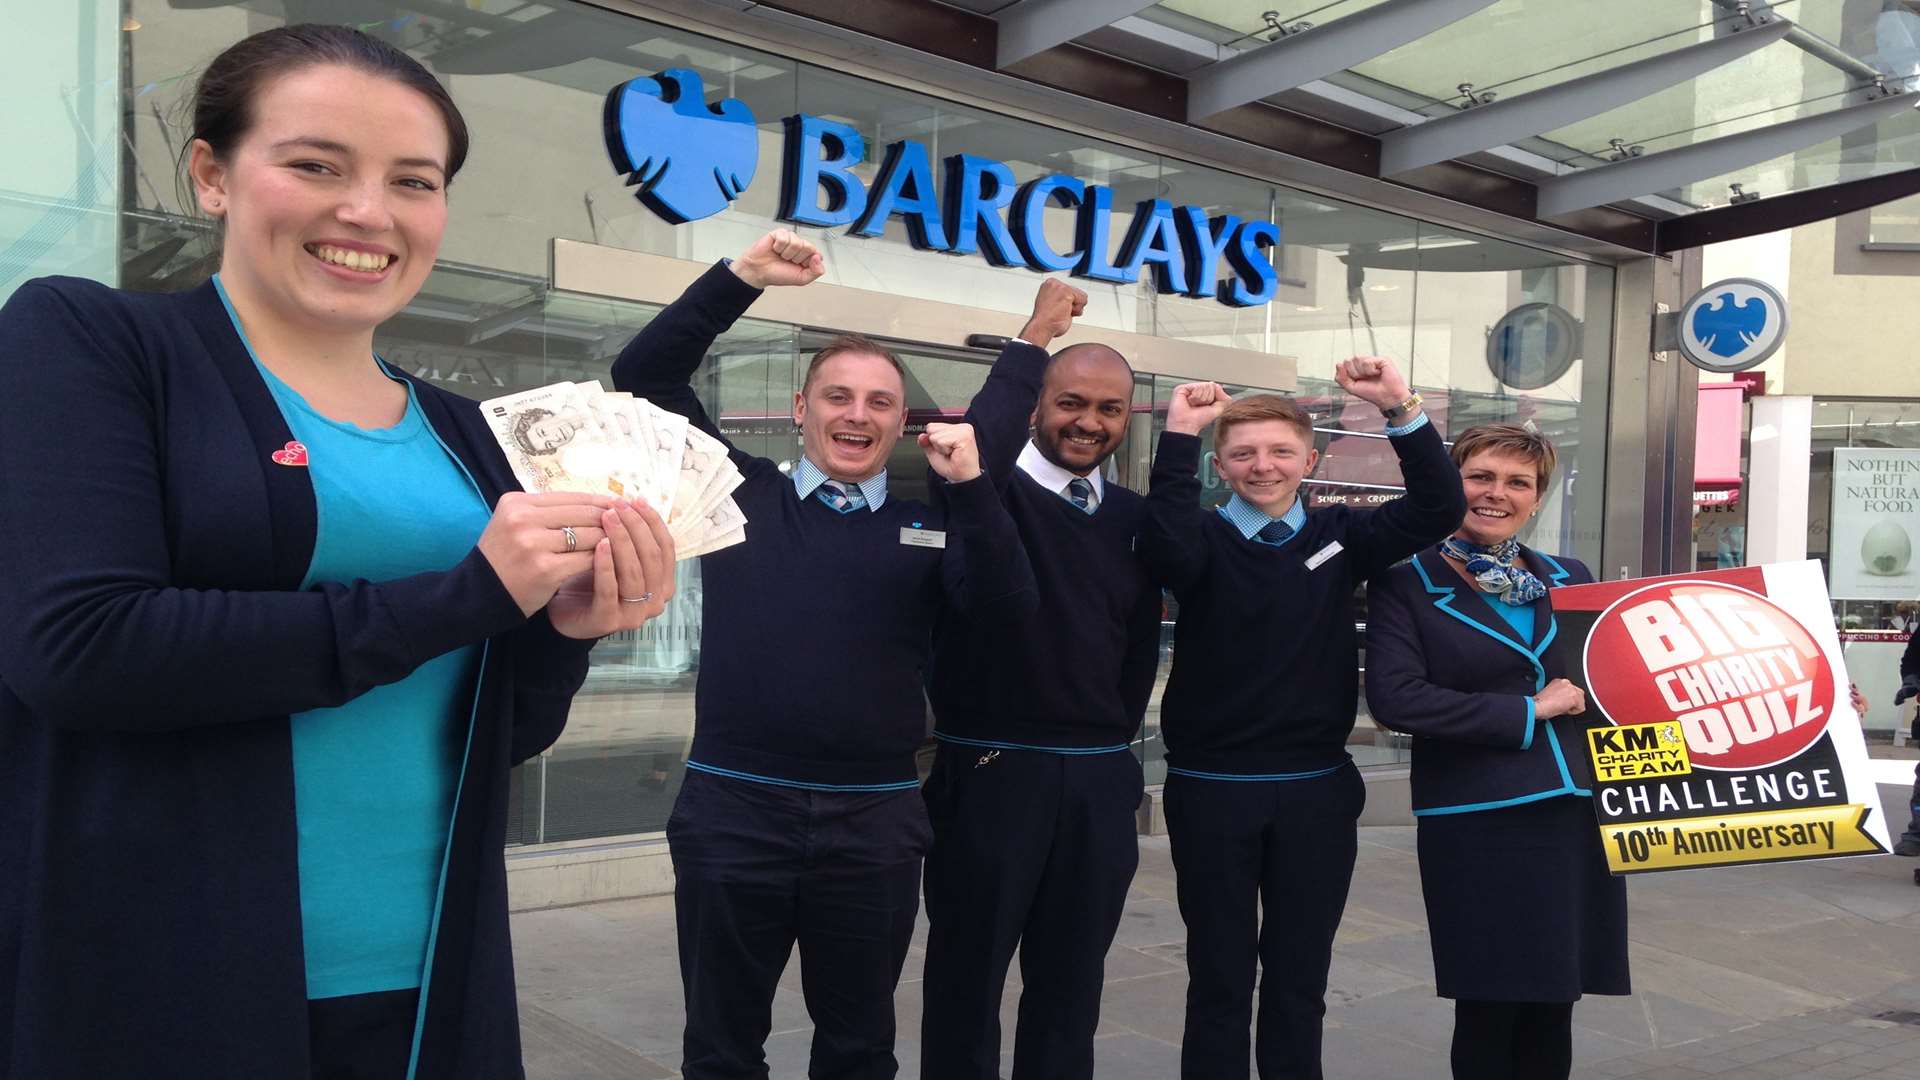 Barclays bank will match funds raised pound for pound at the KM Big Quiz on June 19.